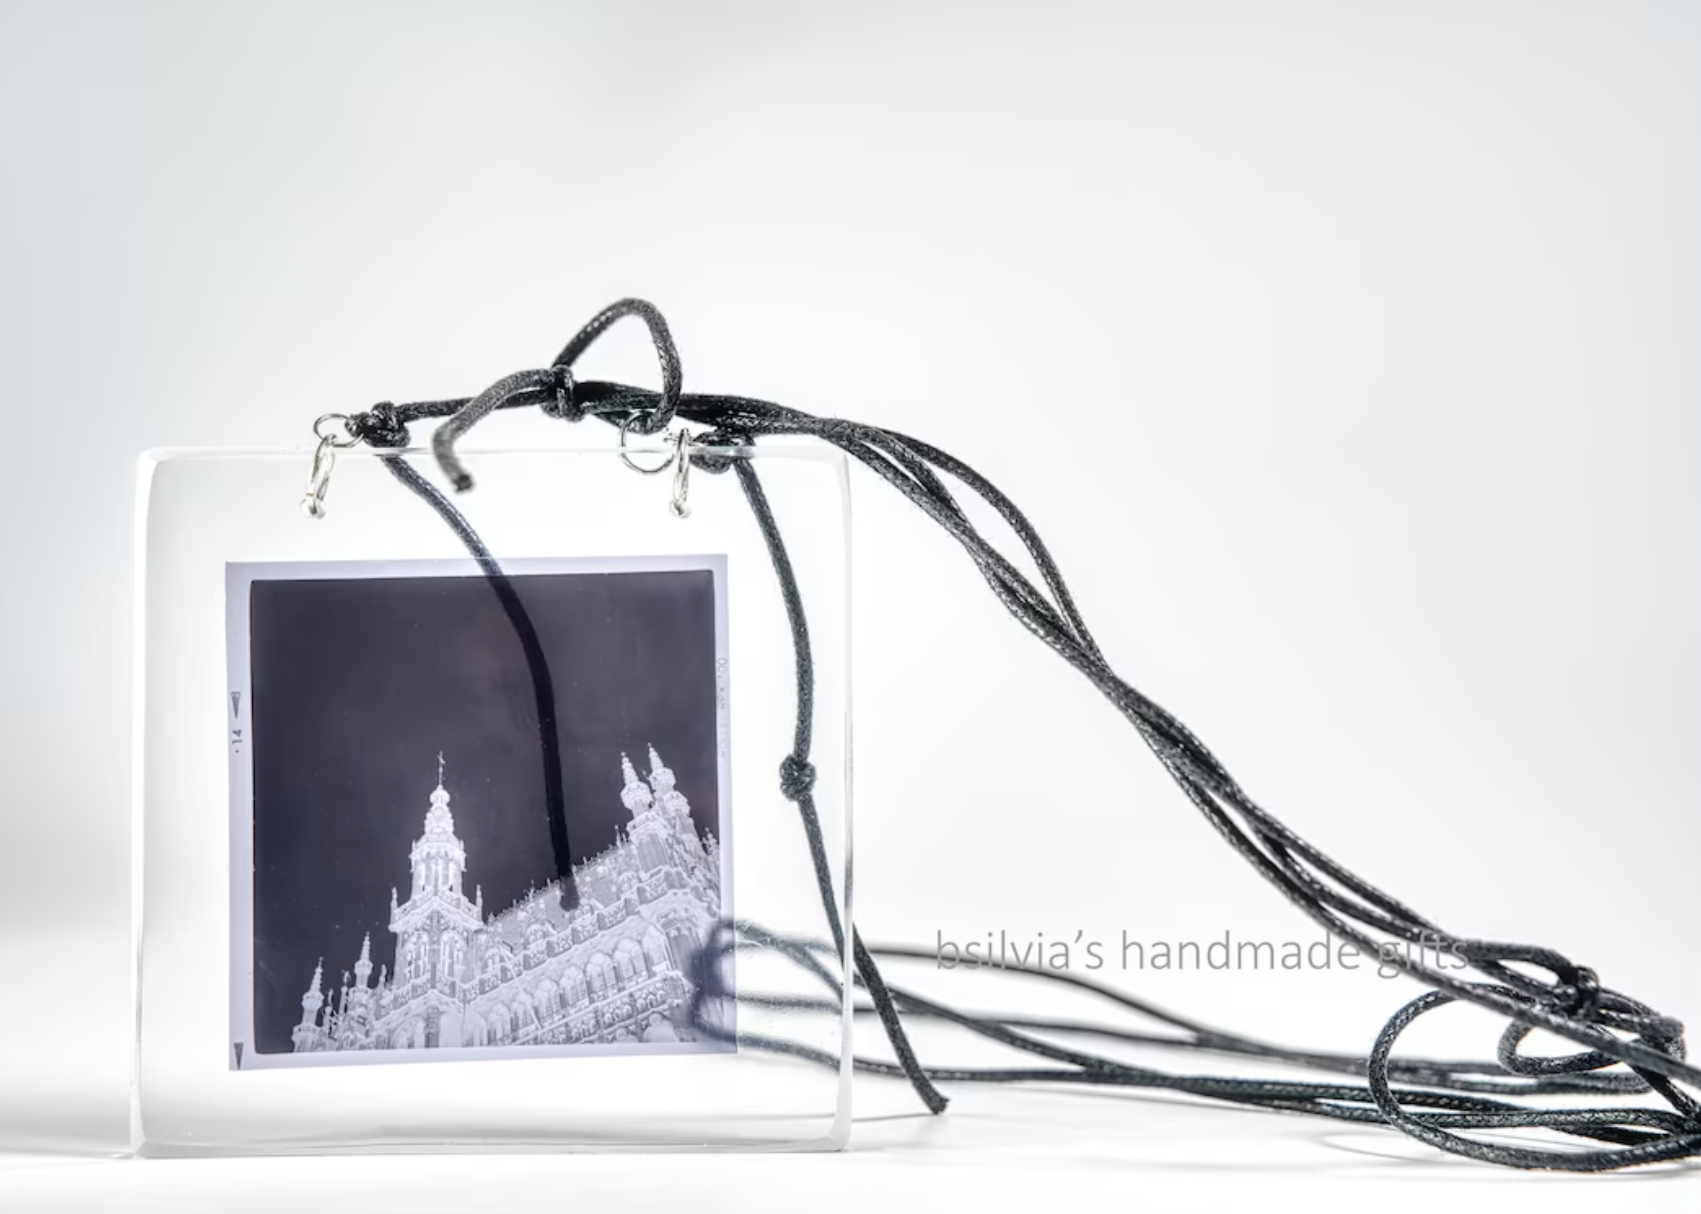 My Handcrafted Epoxy Pendant of Brussels' Grand Place